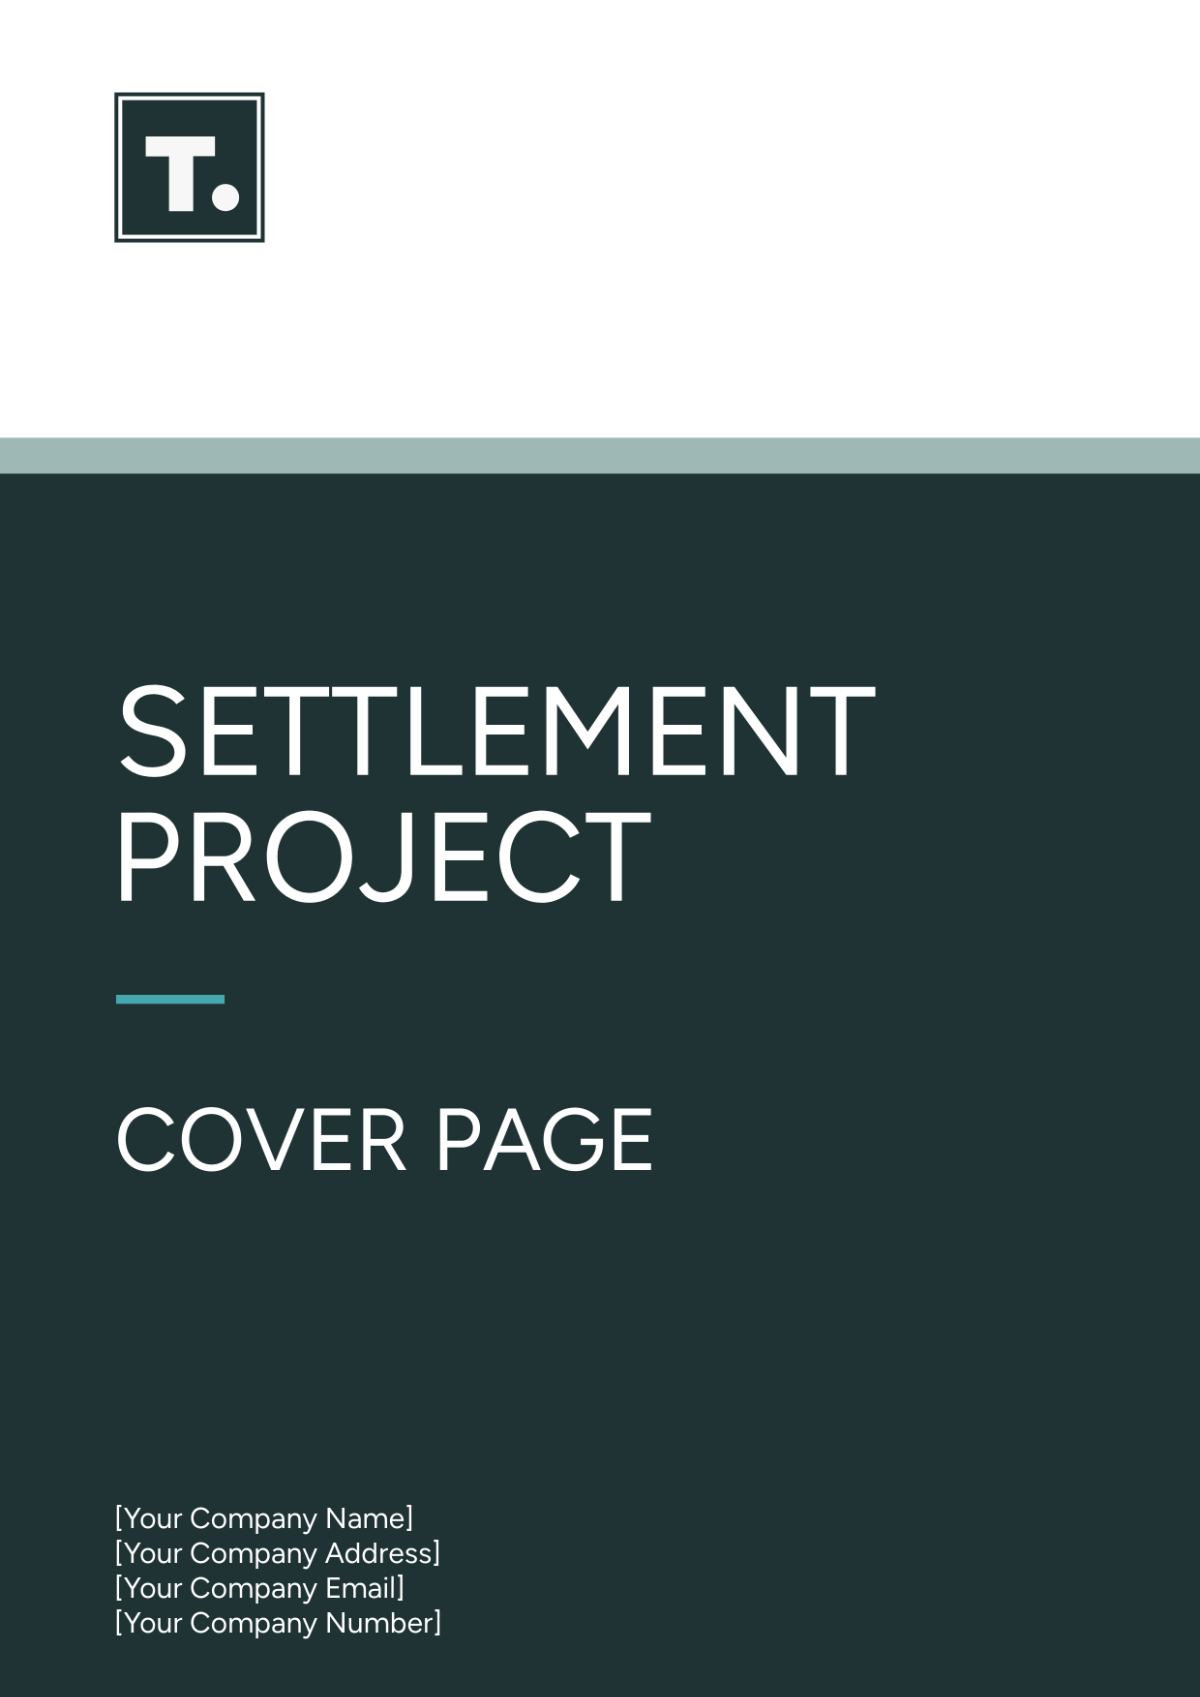 Settlement Project Cover Page